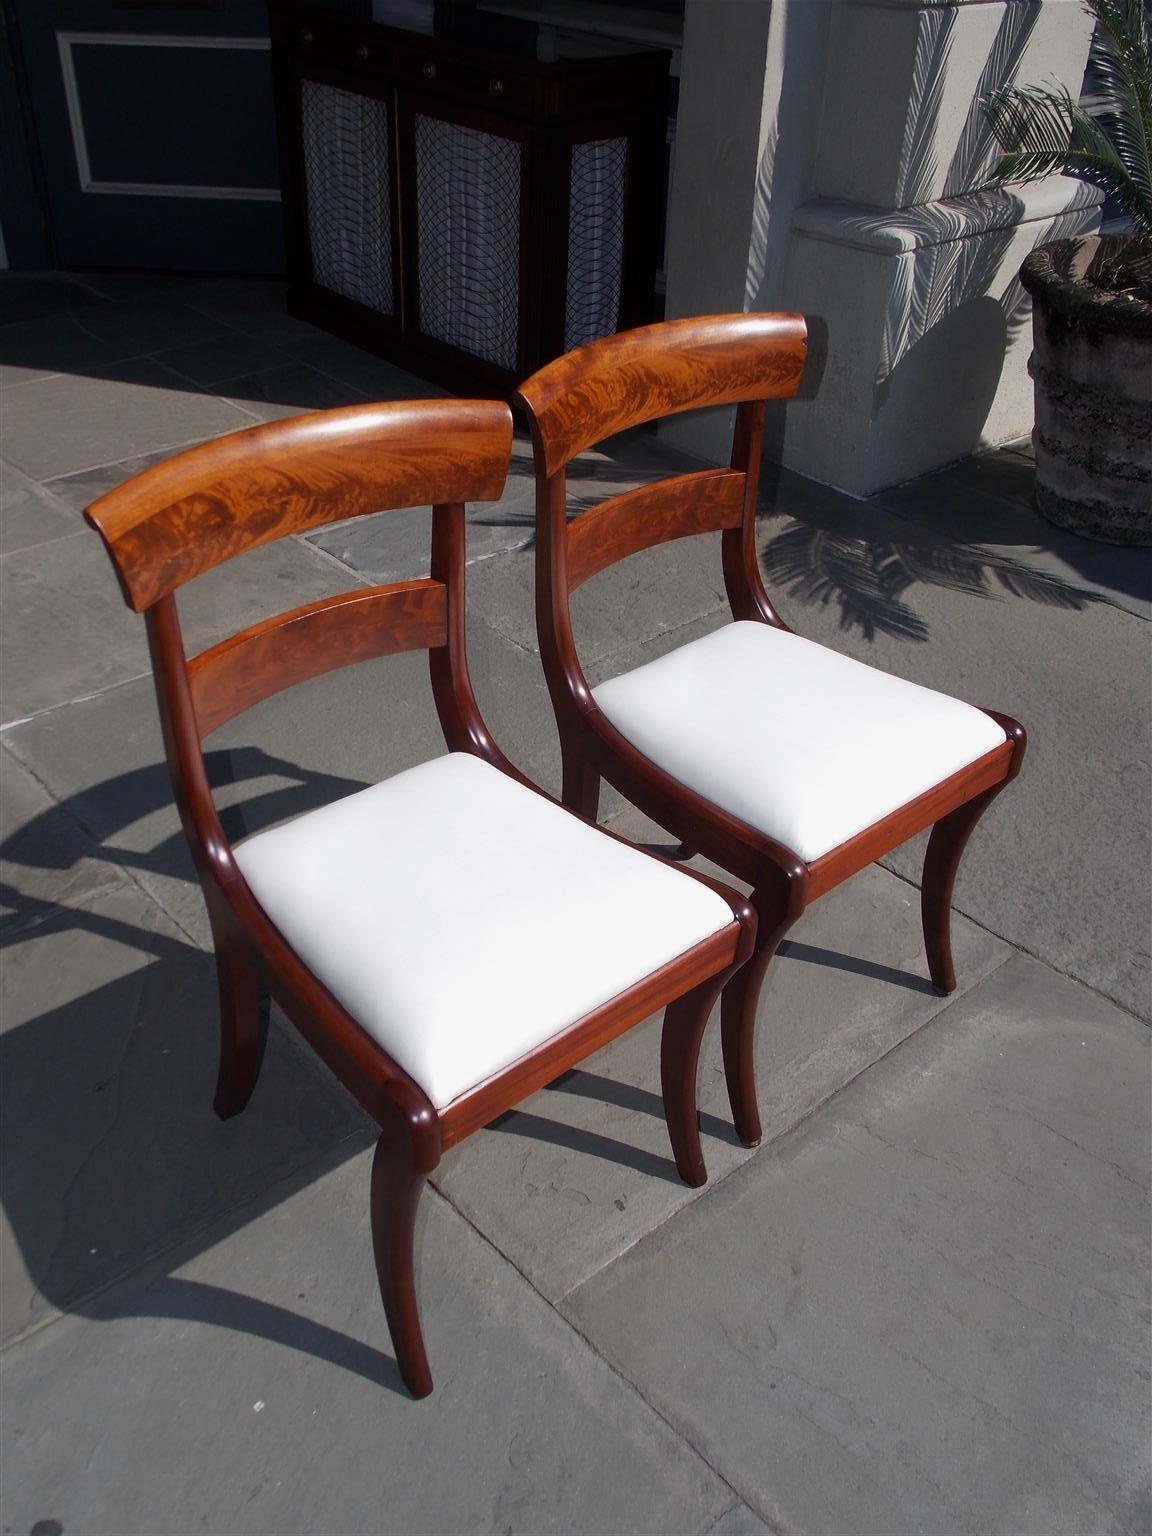 Pair of American Federal mahogany side chairs with carved splat backs, removable upholstered white muslin seats, and terminating on the original saber legs. Early 19th century.